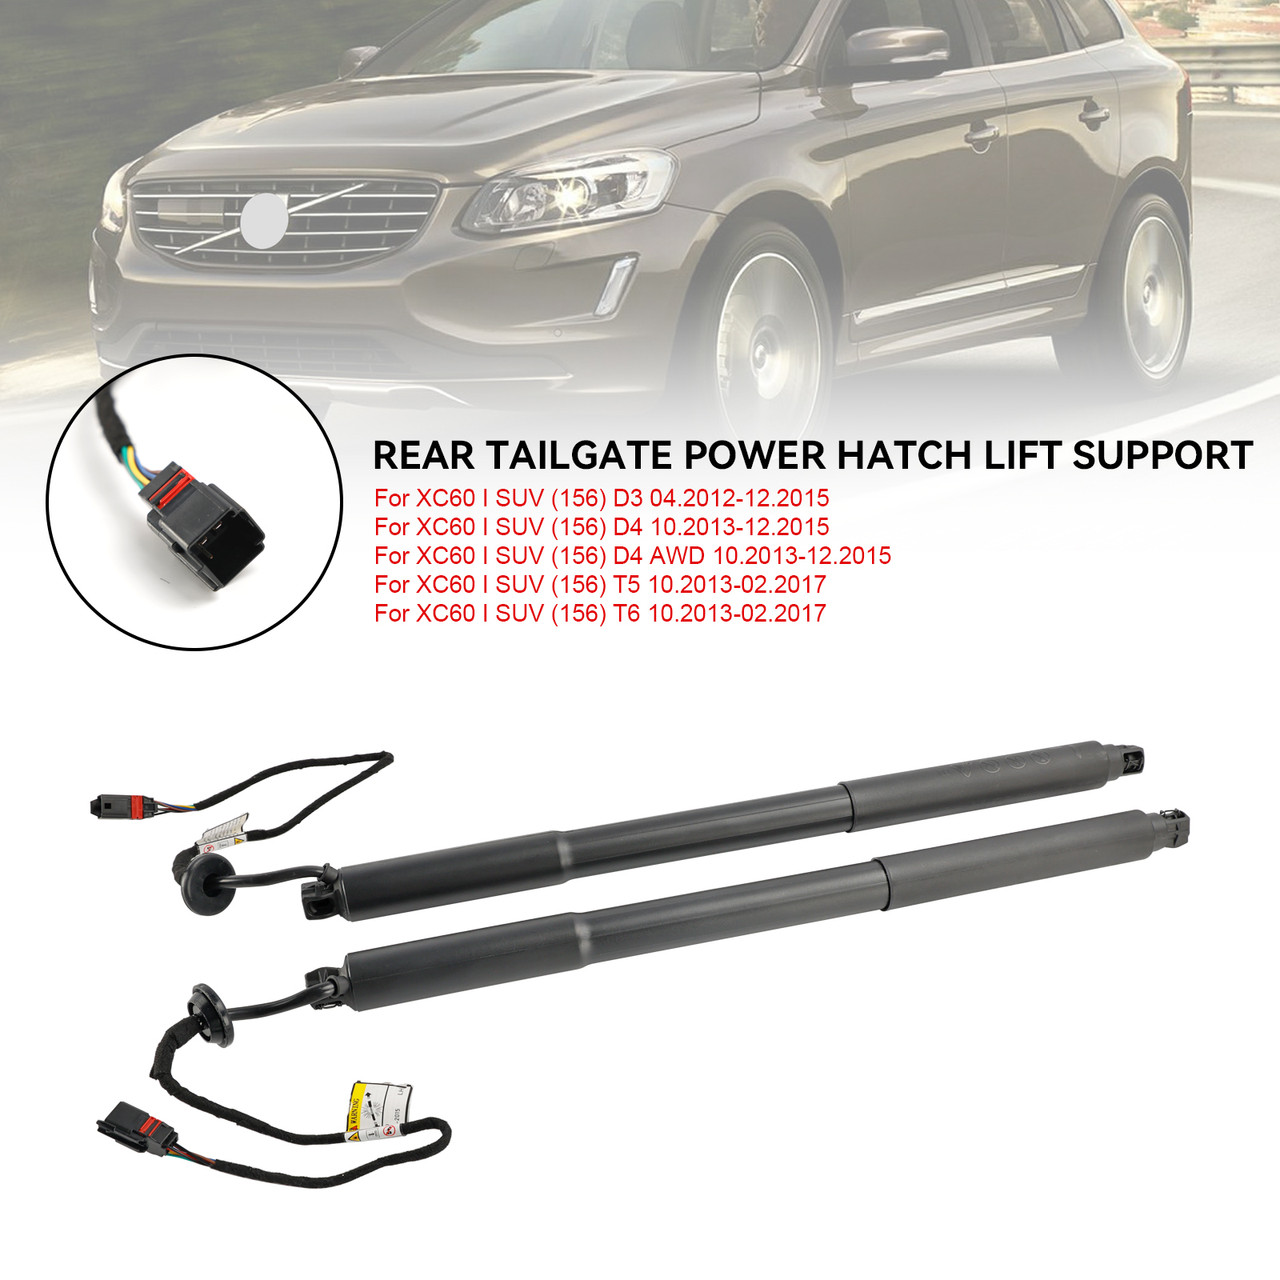 2013-2015 Volvo XC60 I SUV (156) D4 Rear Tailgate Power Hatch Lift Support 31298577, 31352186, 31386706, 31479628, 31298576, 31352185, 31386705, 31479627 black Generic